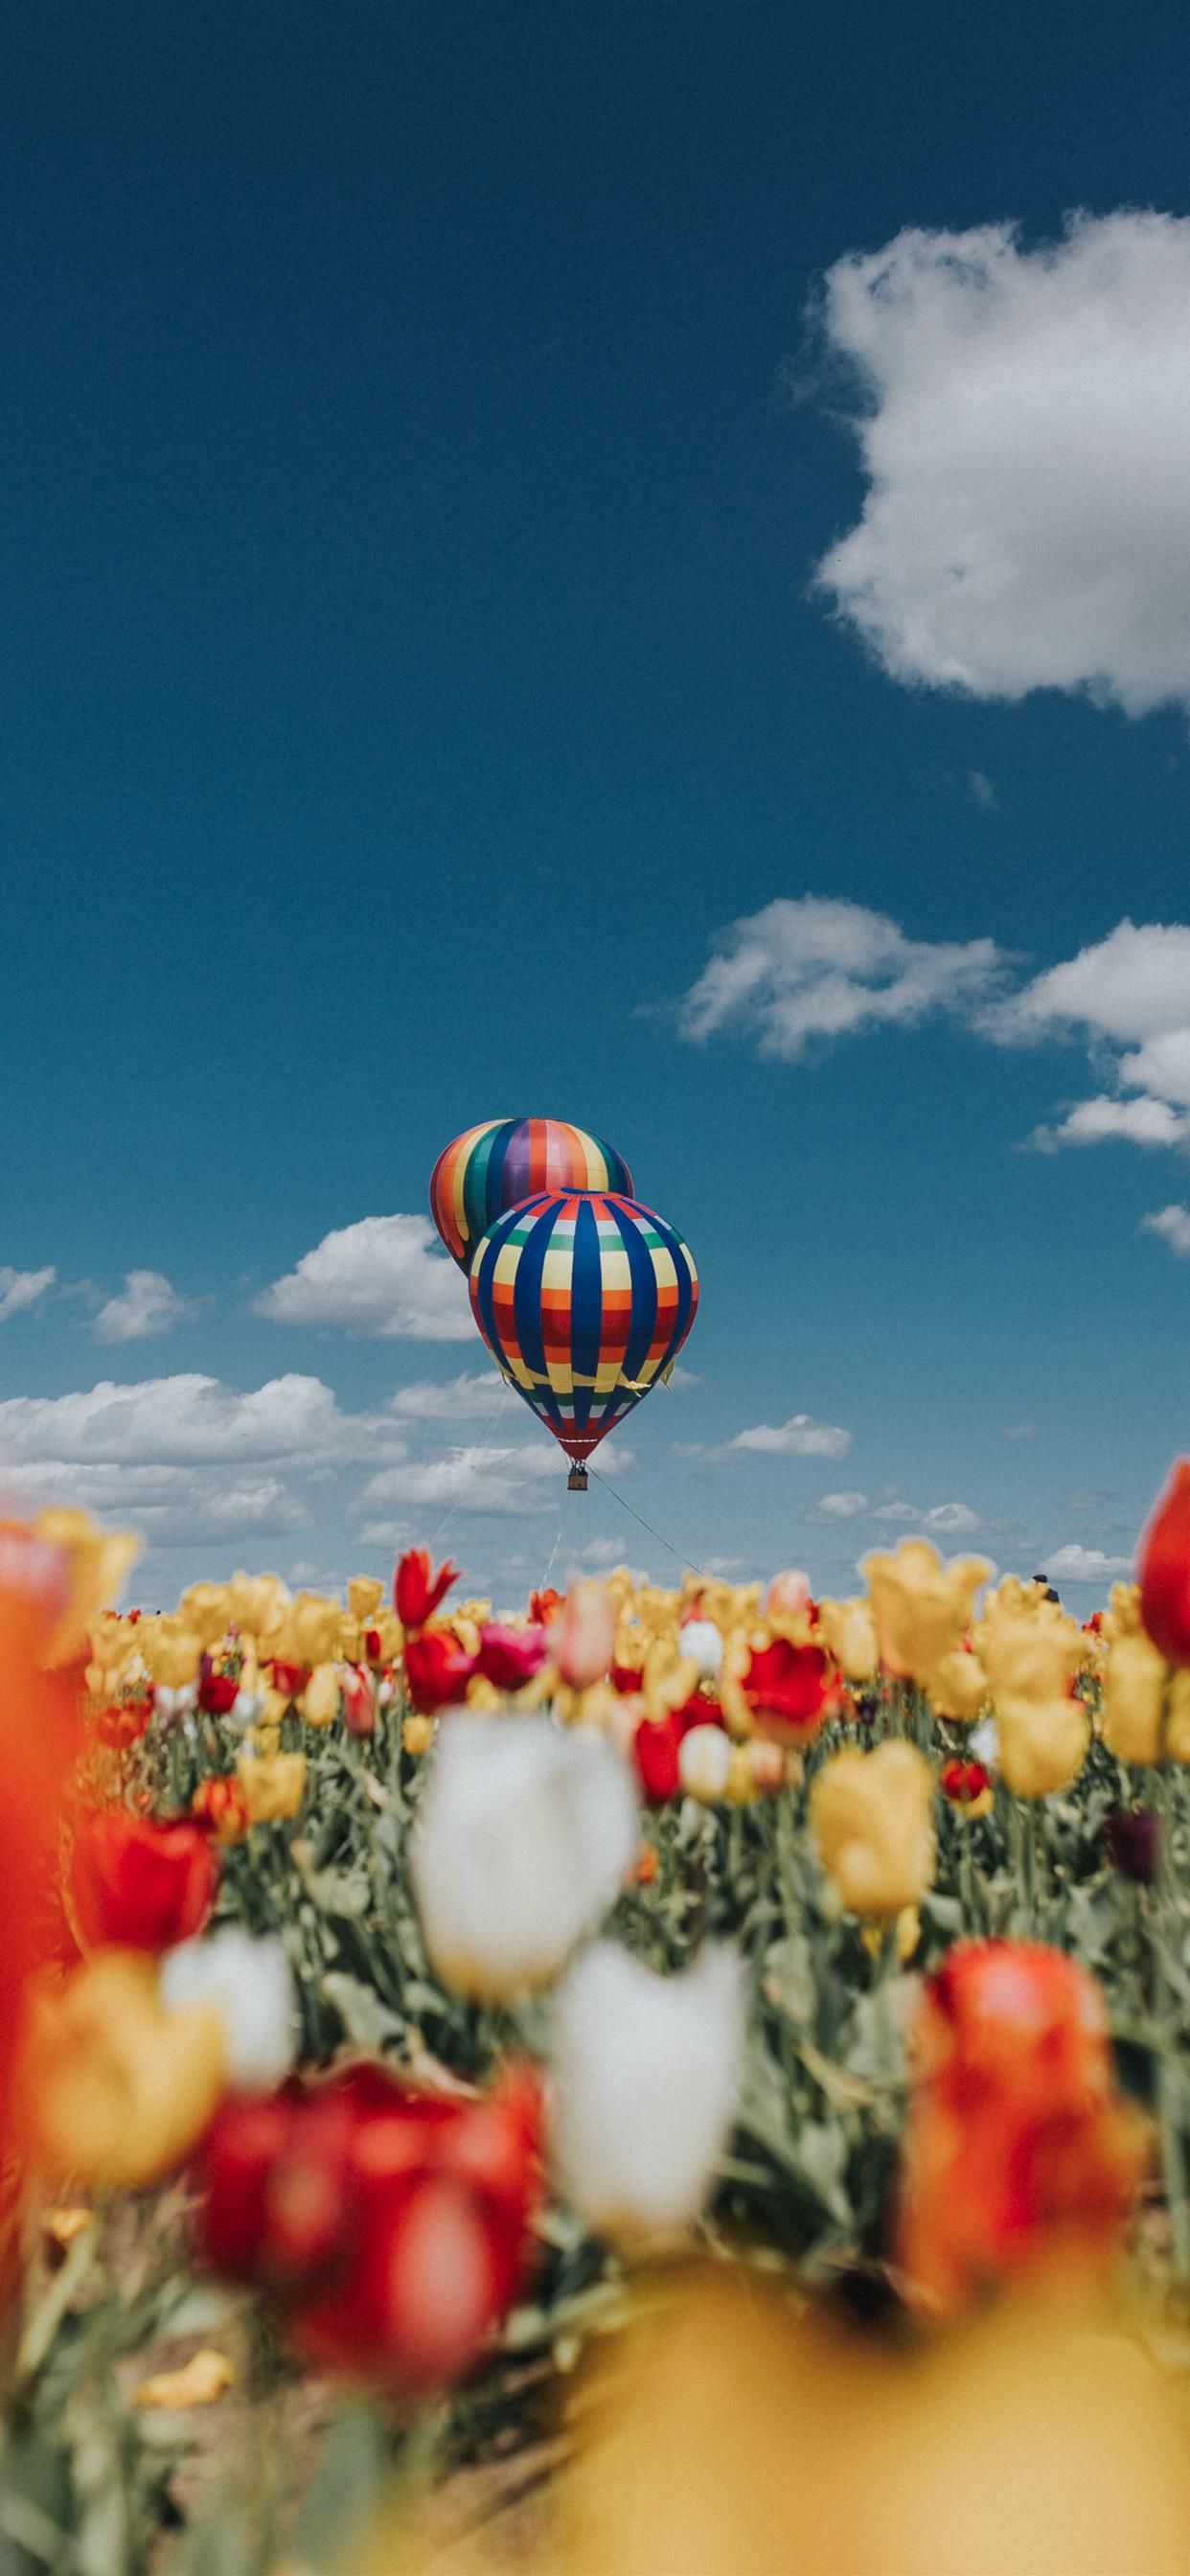 Balloon Over Tulips iPhone Wallpaper Free Download